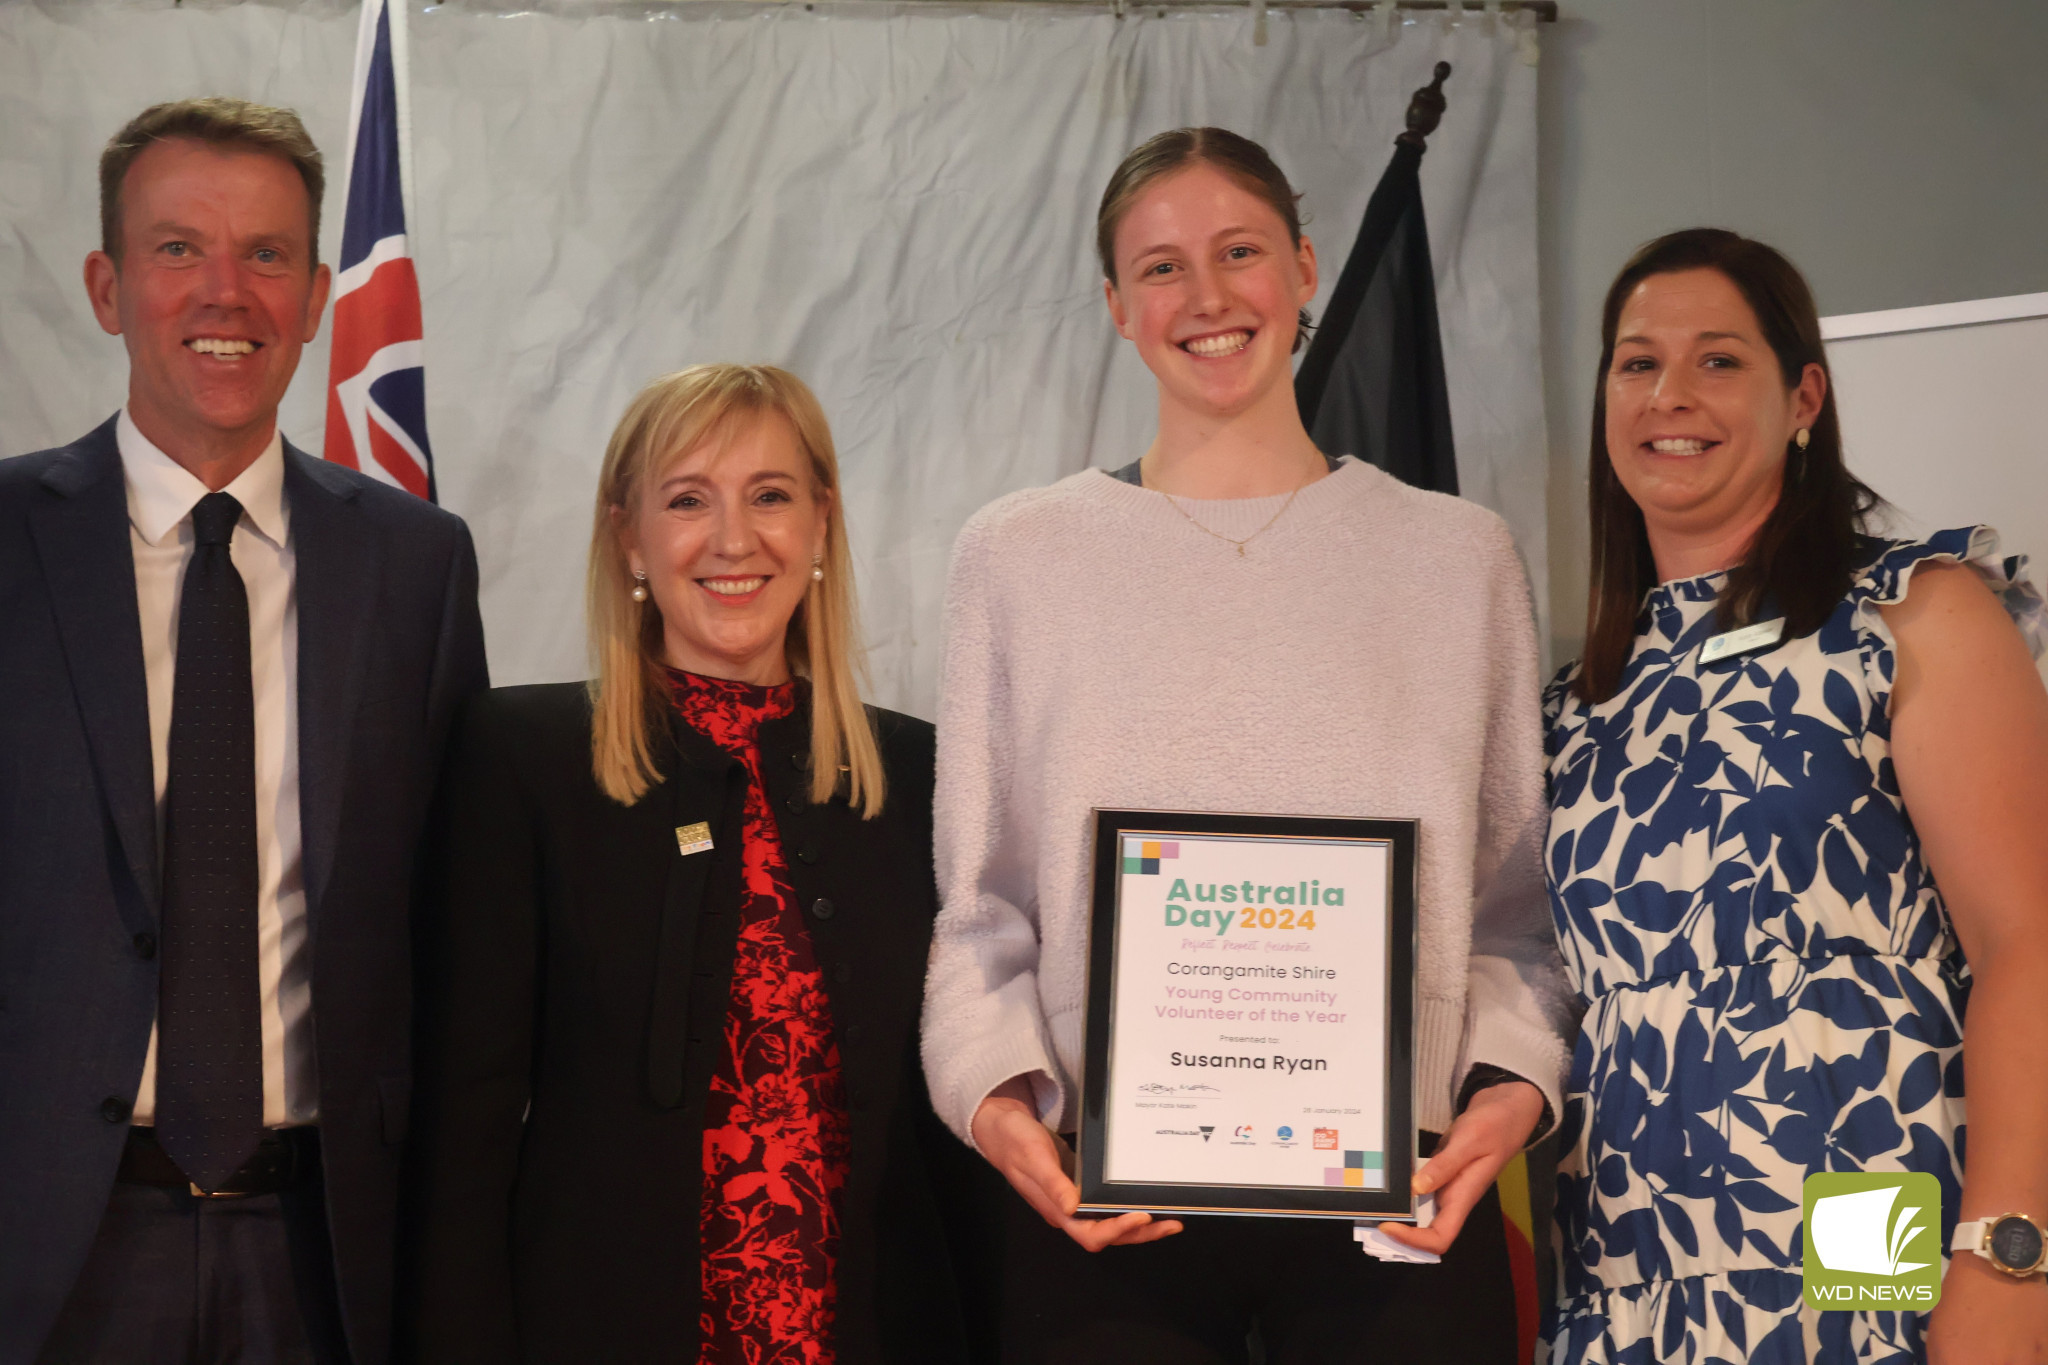 Congratulations: Timboon’s Susanna Ryan was named Young Community Volunteer of the Year during Corangamite Shire’s Australia Day Awards last Friday. She is pictured with Wannon MP Dan Tehan, Margaret Zita OAM and Corangamite Shire mayor Kate Makin.